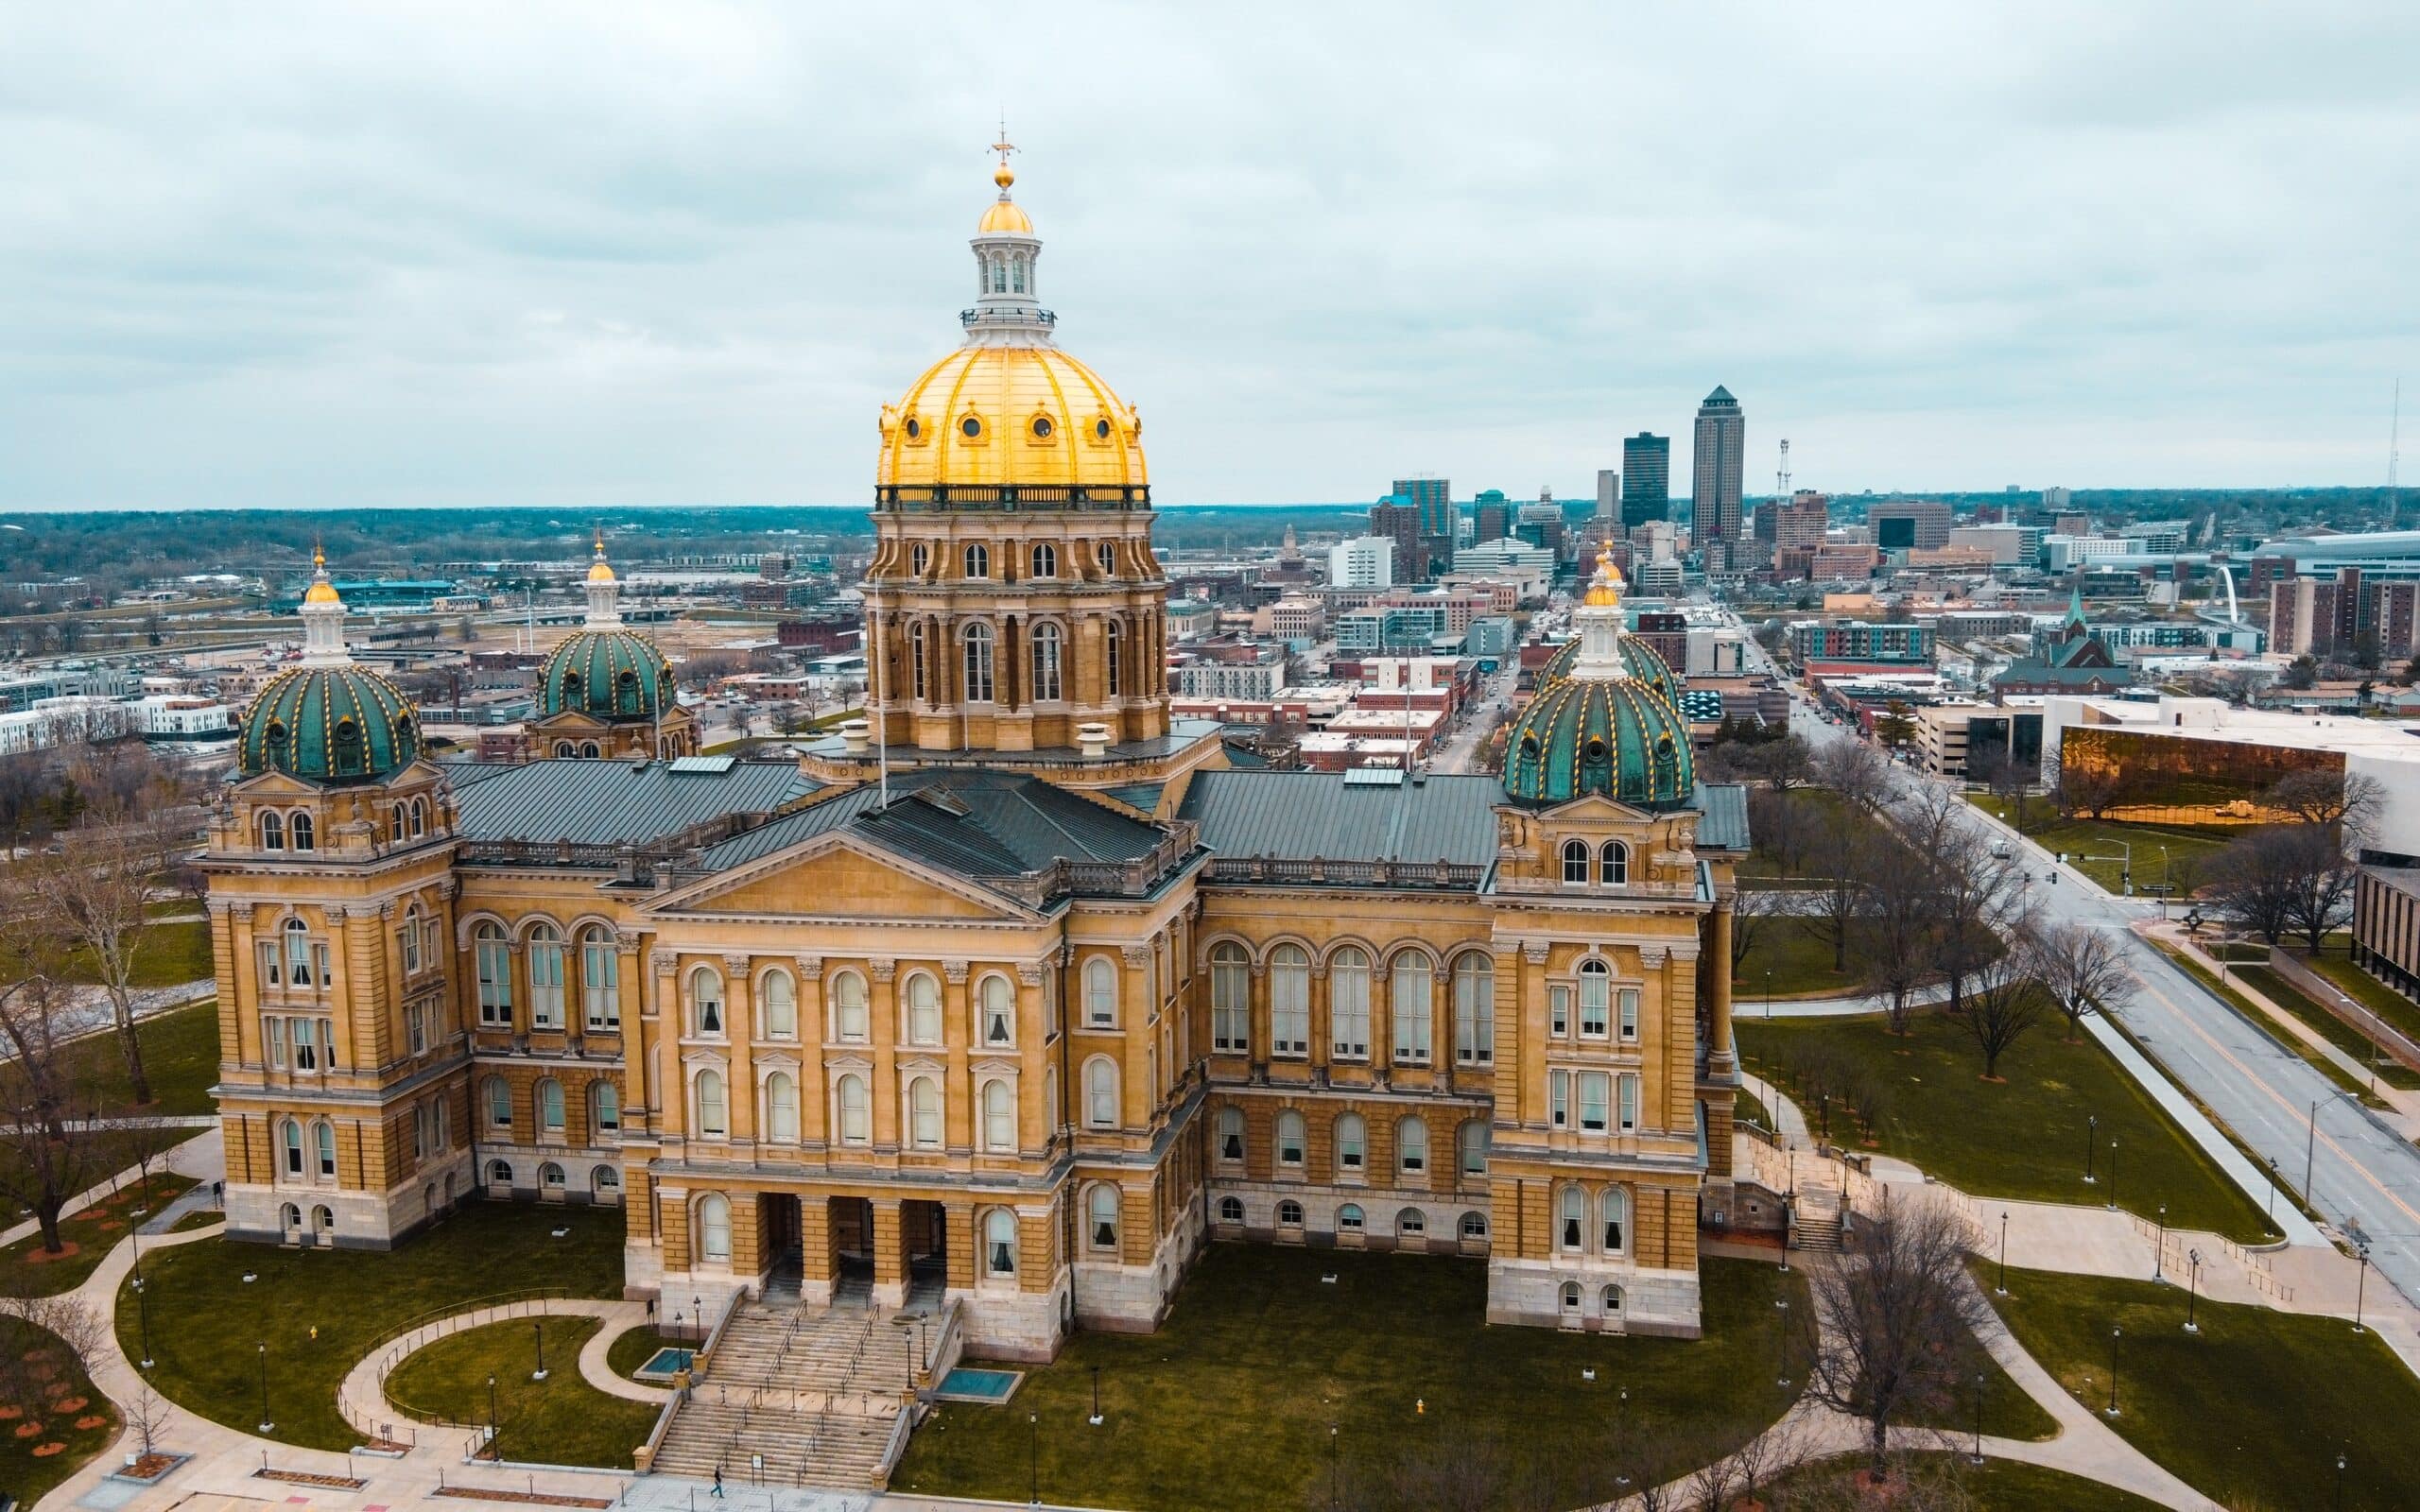 A photo of the des moines capital building